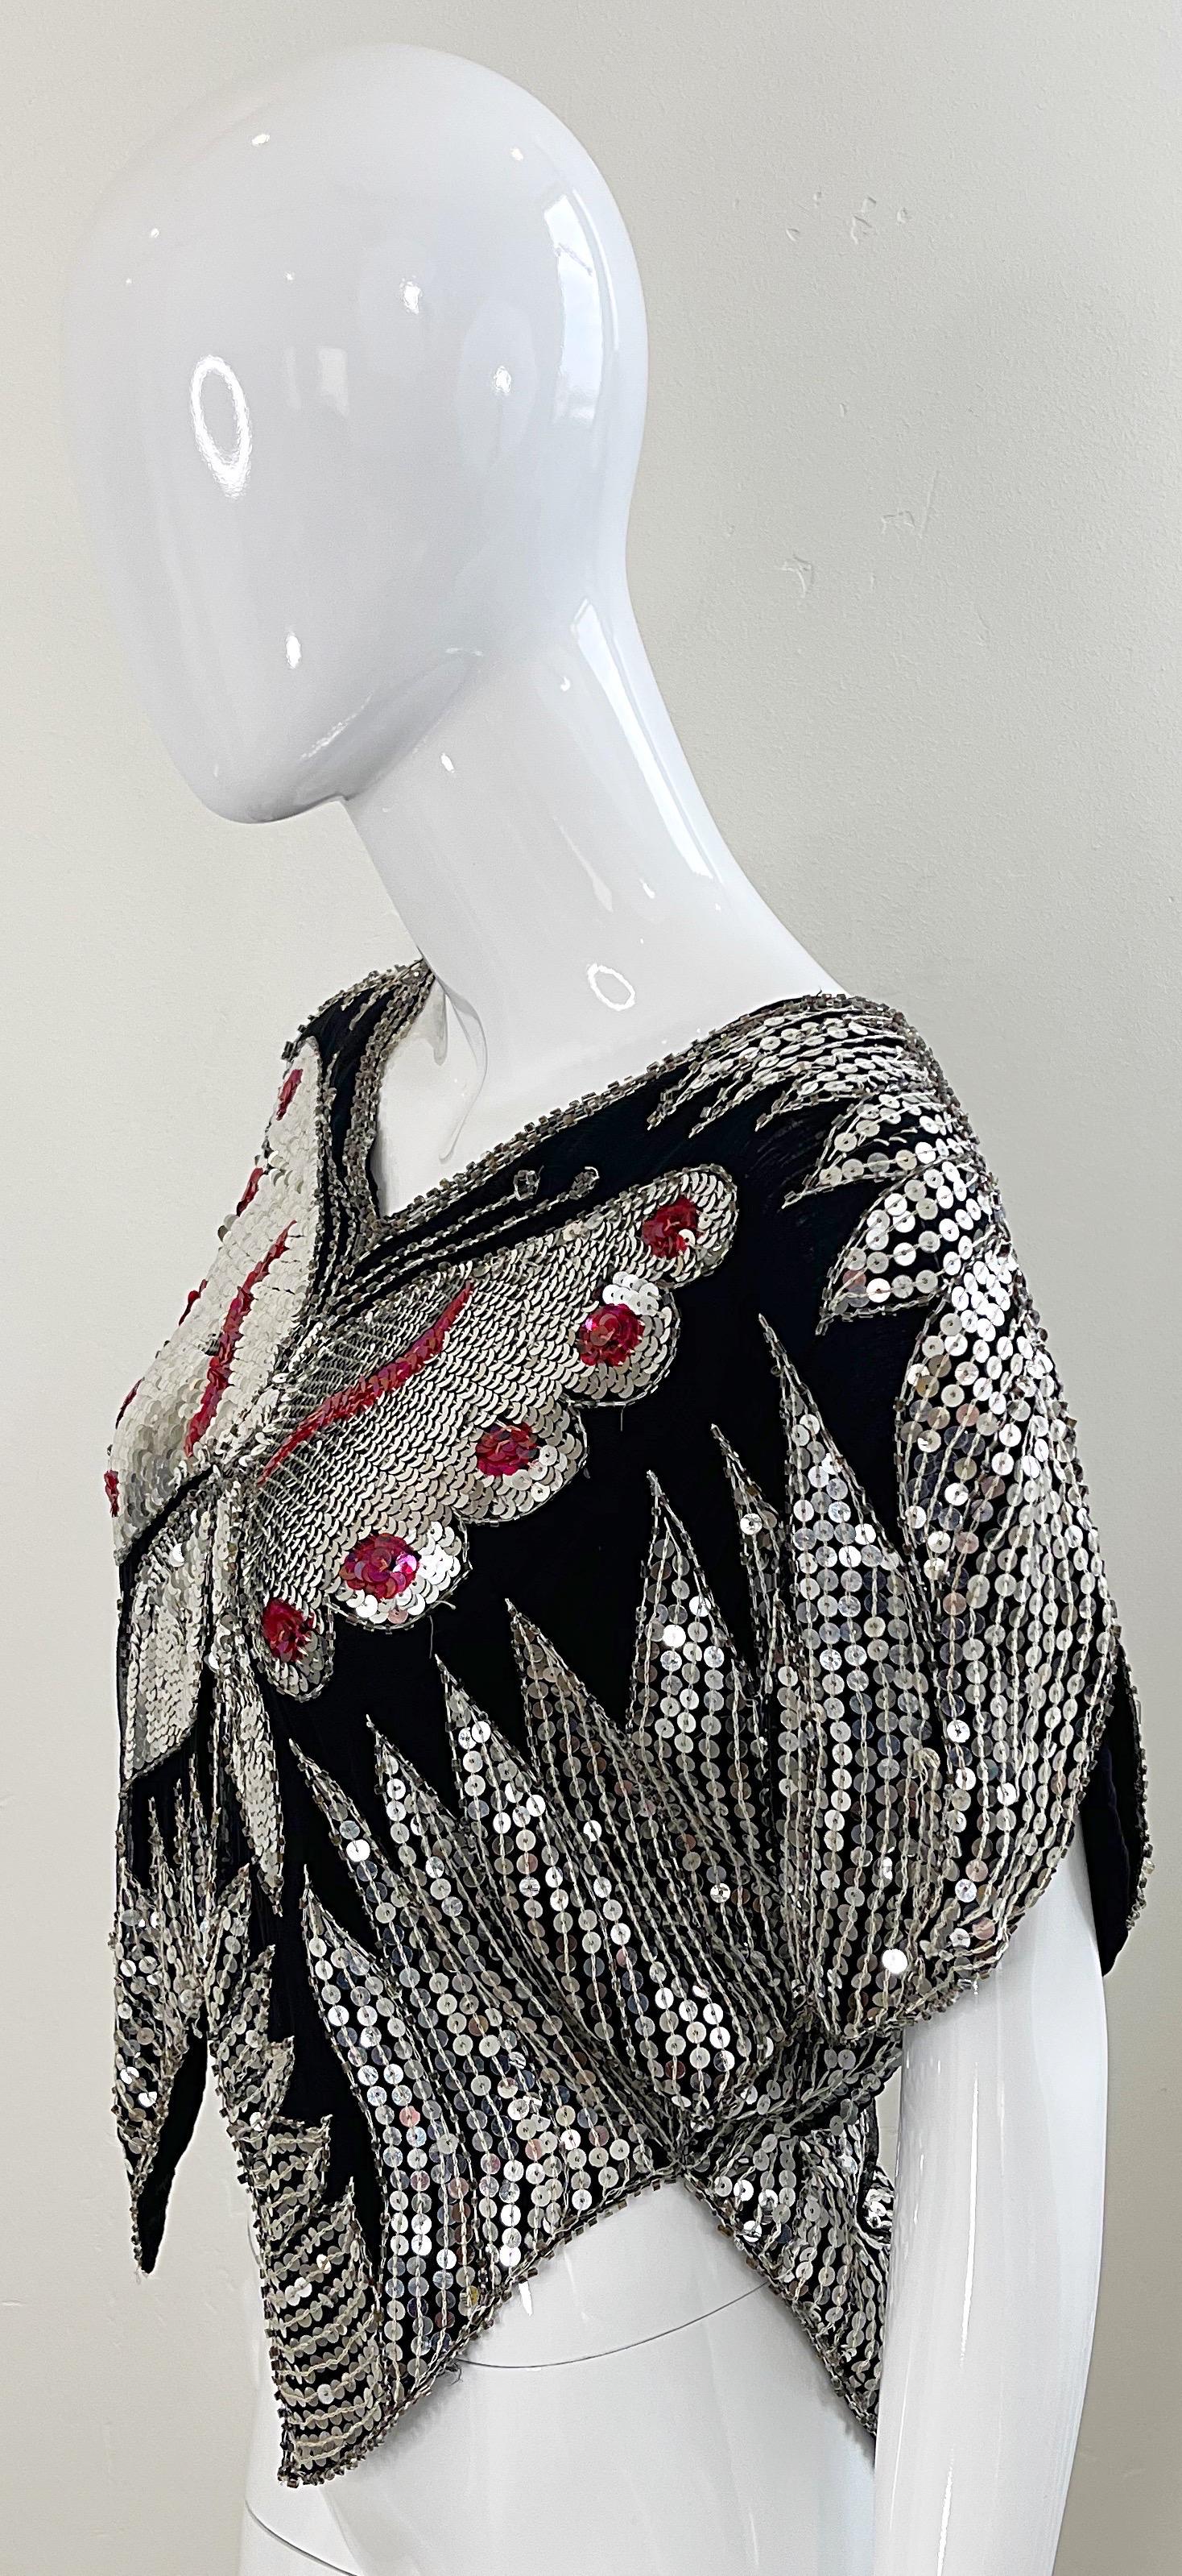 Studio 54 Early 1980s Butterfly Red Silver Black Sequin Disco Vintage 80s Top For Sale 1